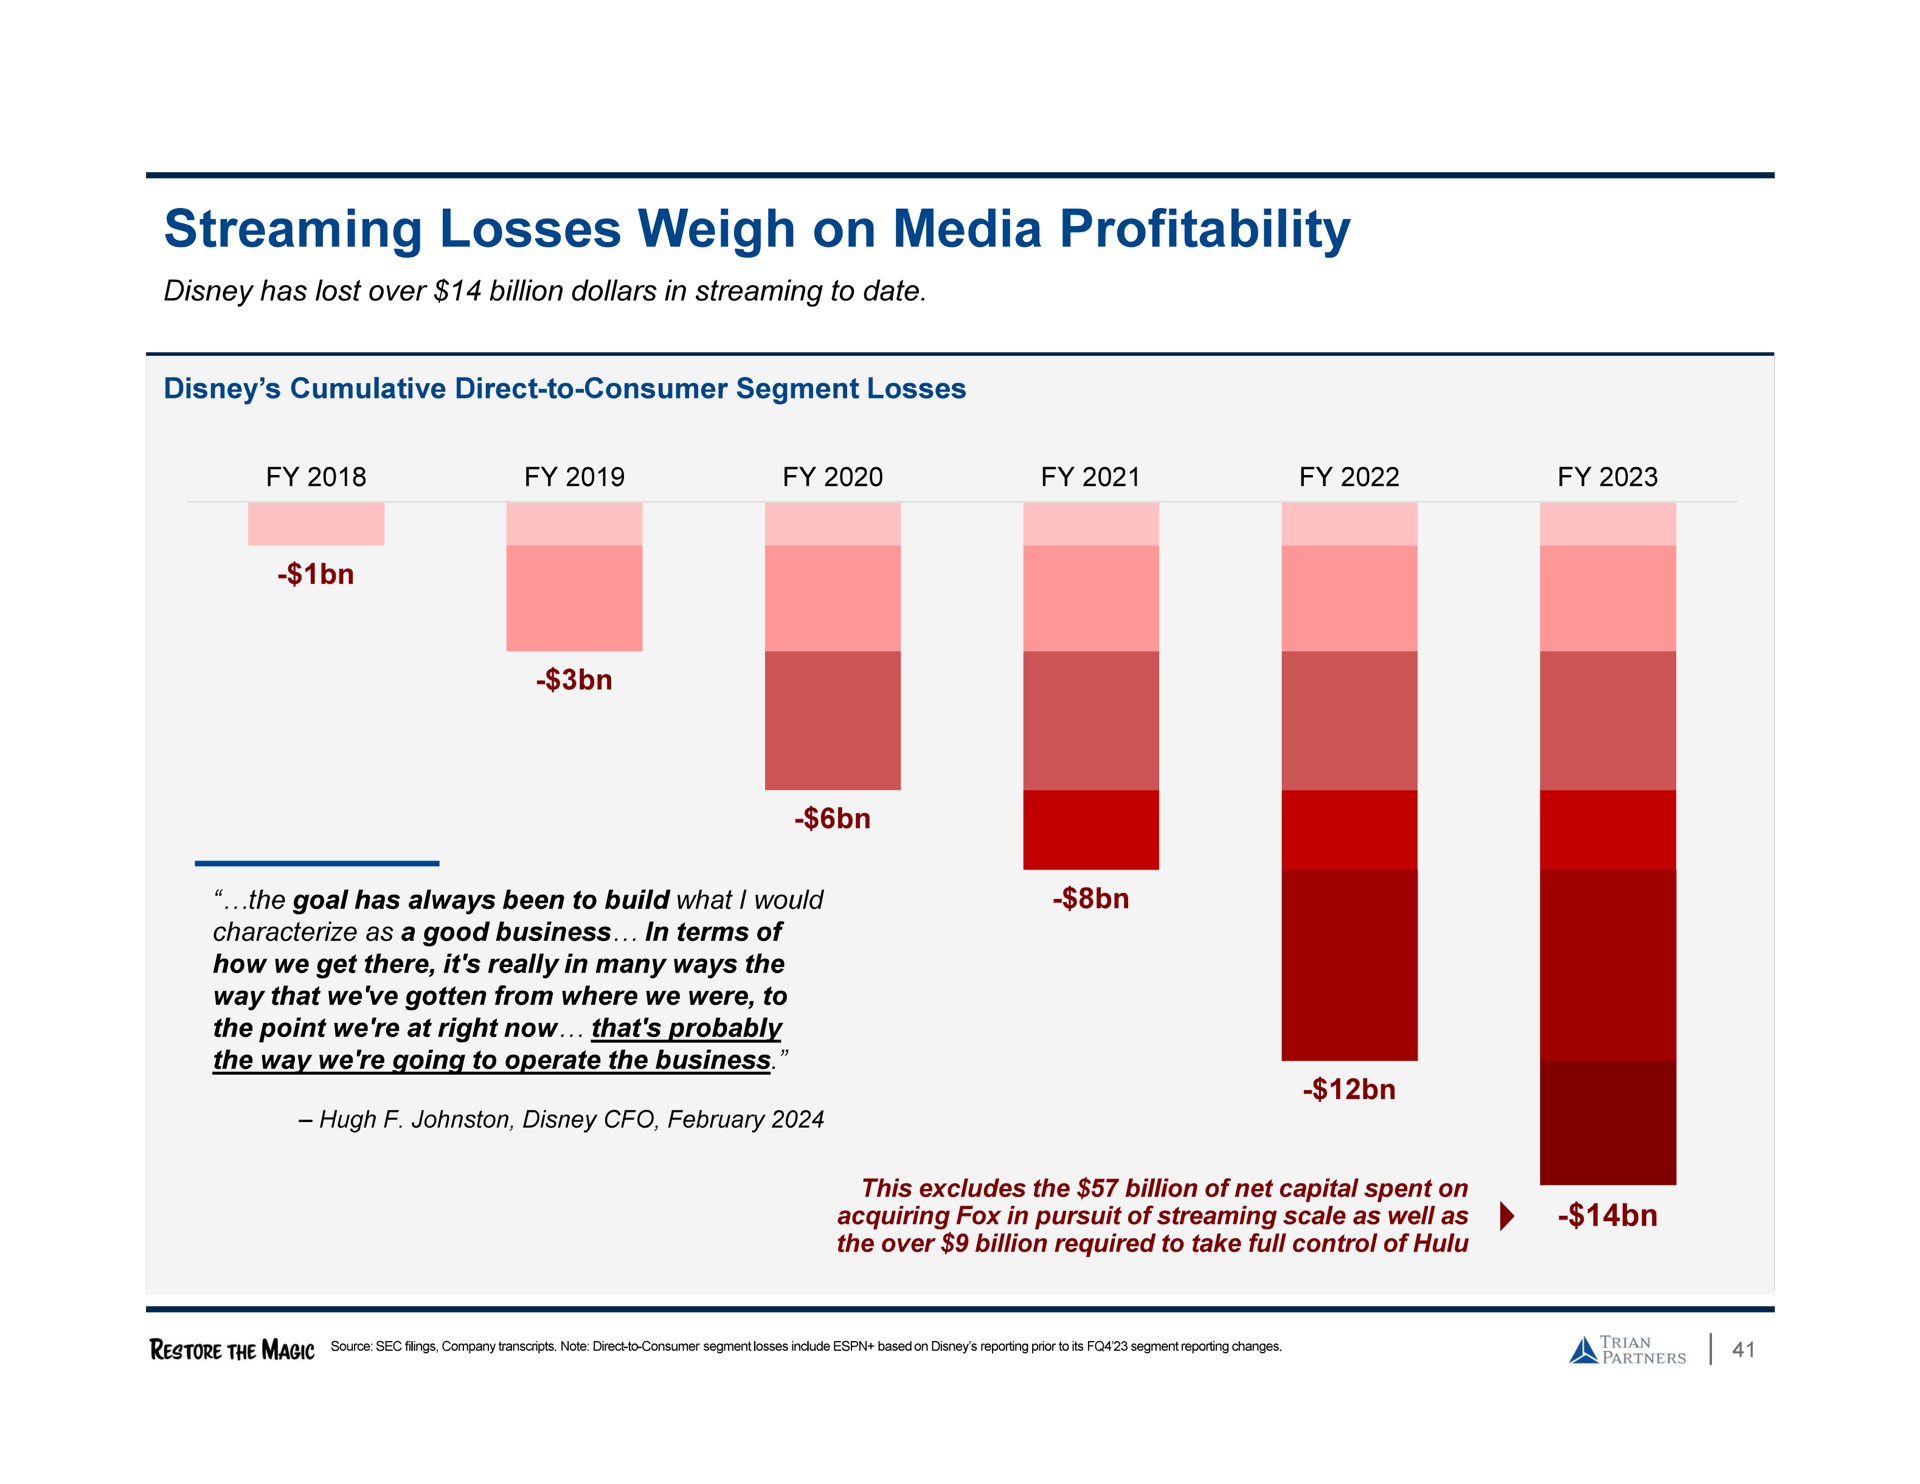 streaming losses weigh on media profitability | Trian Partners